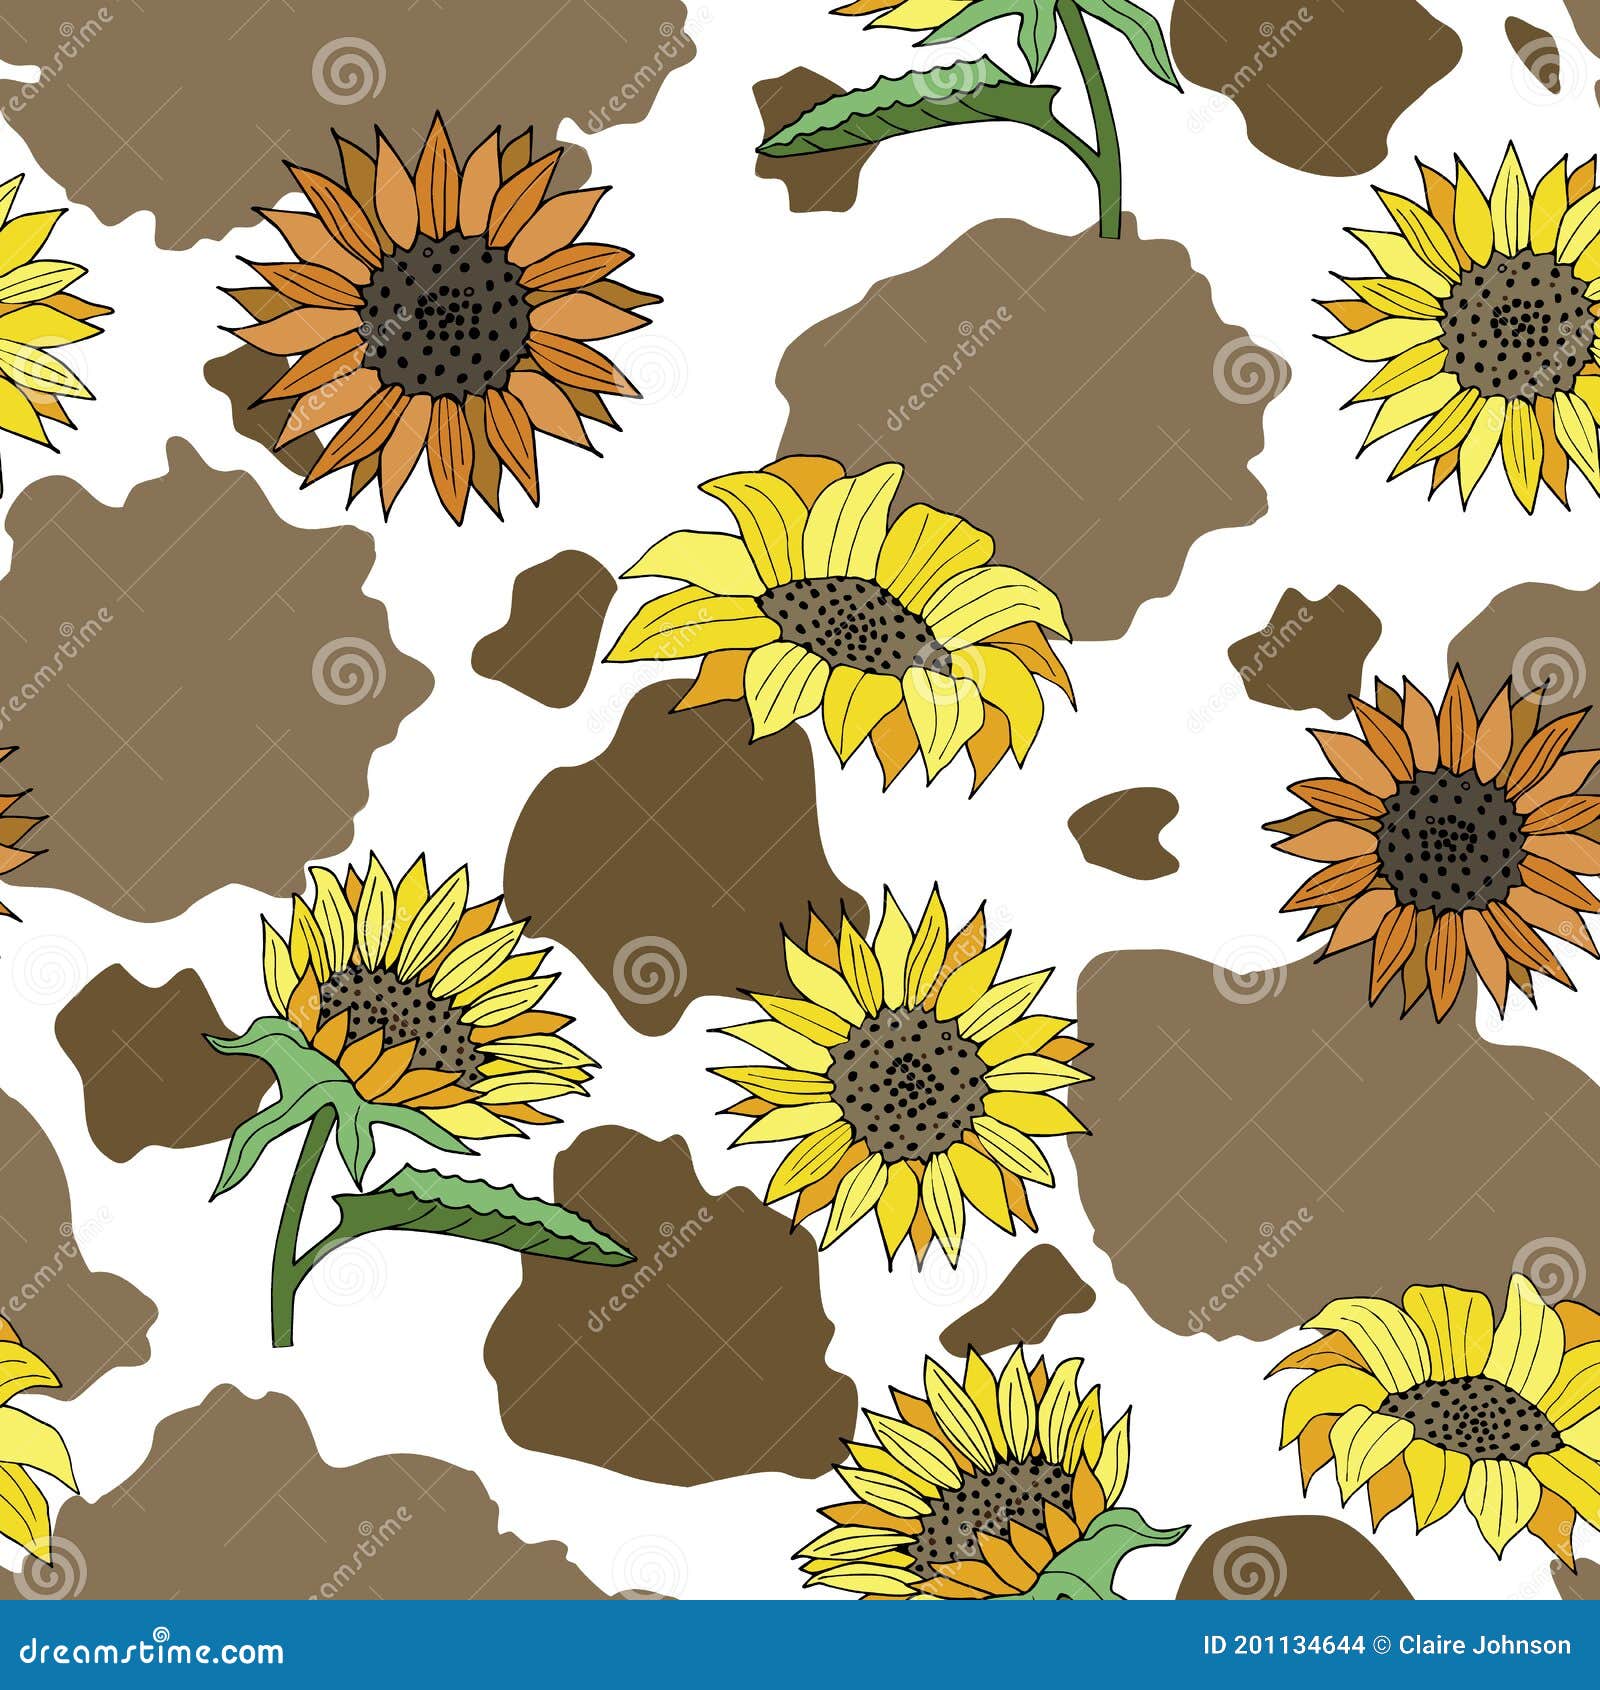 Watercolor hand drawn seamless cow print fabric pattern yellow sunflower  floral black white colors Cowboy cow girl western background illustration  design milk organic animal skin farm wallpaper Stock Photo  Alamy